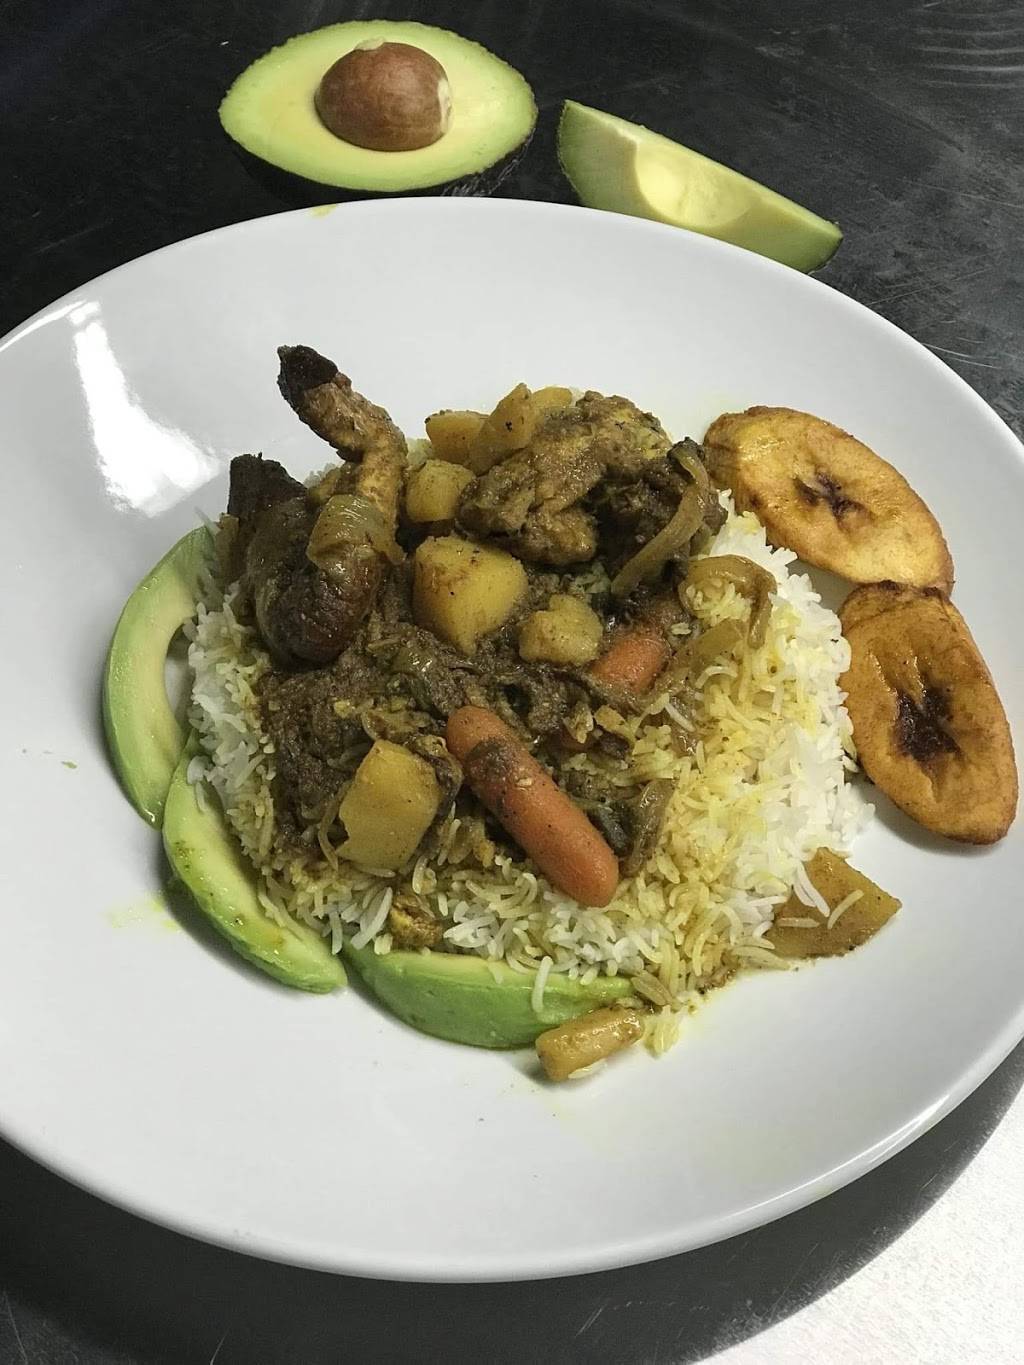 Africa House Lounge And Cafe | restaurant | 2816 Crums Ln, Louisville, KY 40216, USA | 5023847240 OR +1 502-384-7240